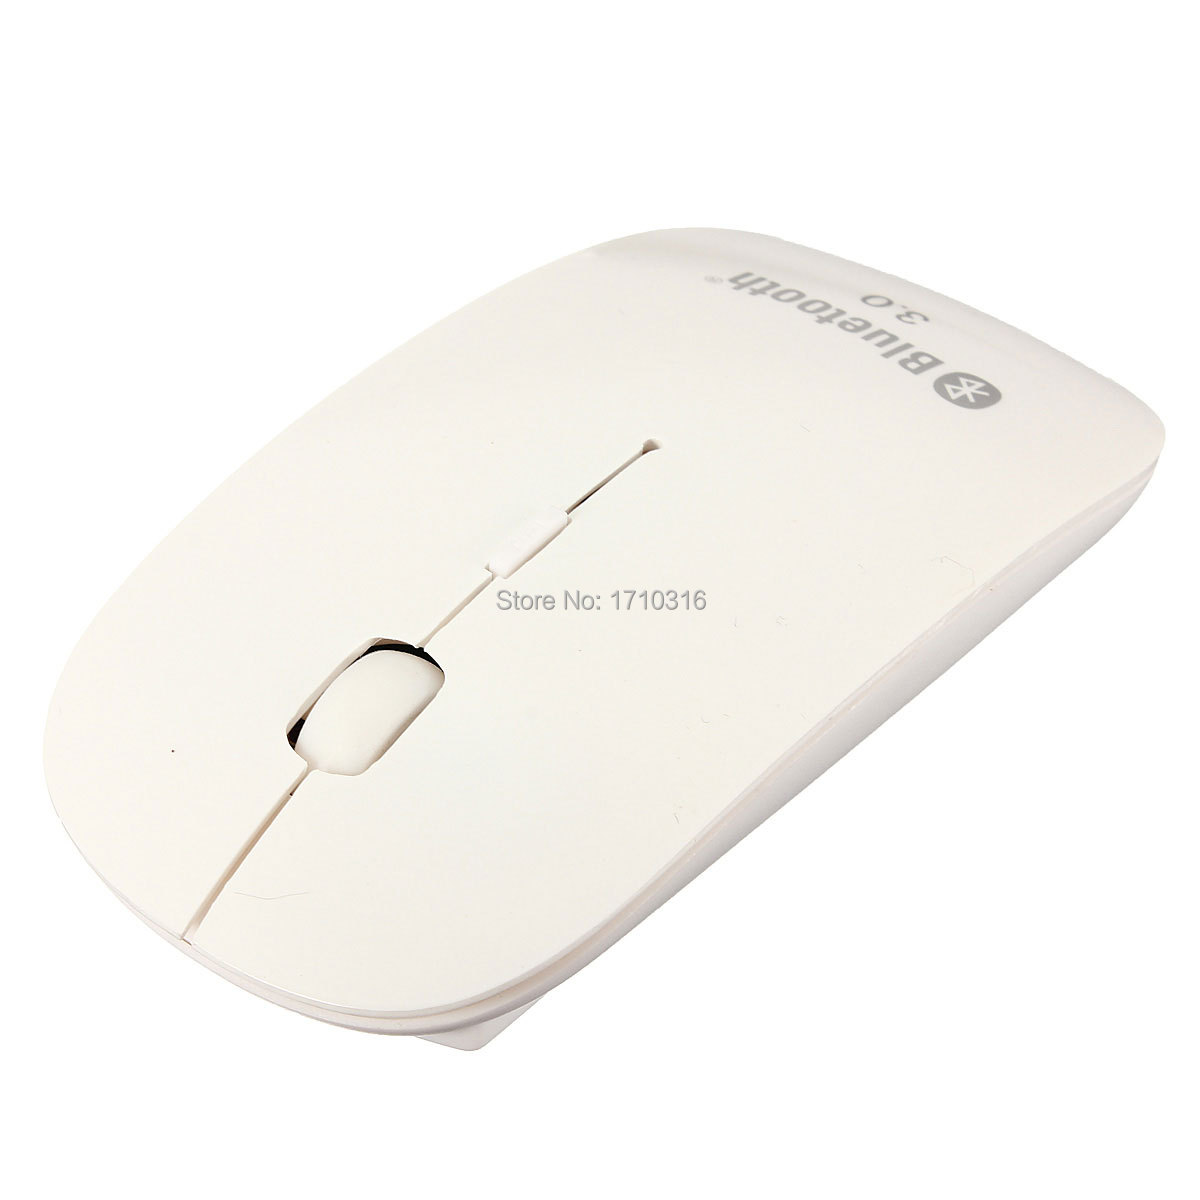 Slim Bluetooth 3 0 Wireless Mouse for Windows PC Laptop Android 3 1 Tablet New 